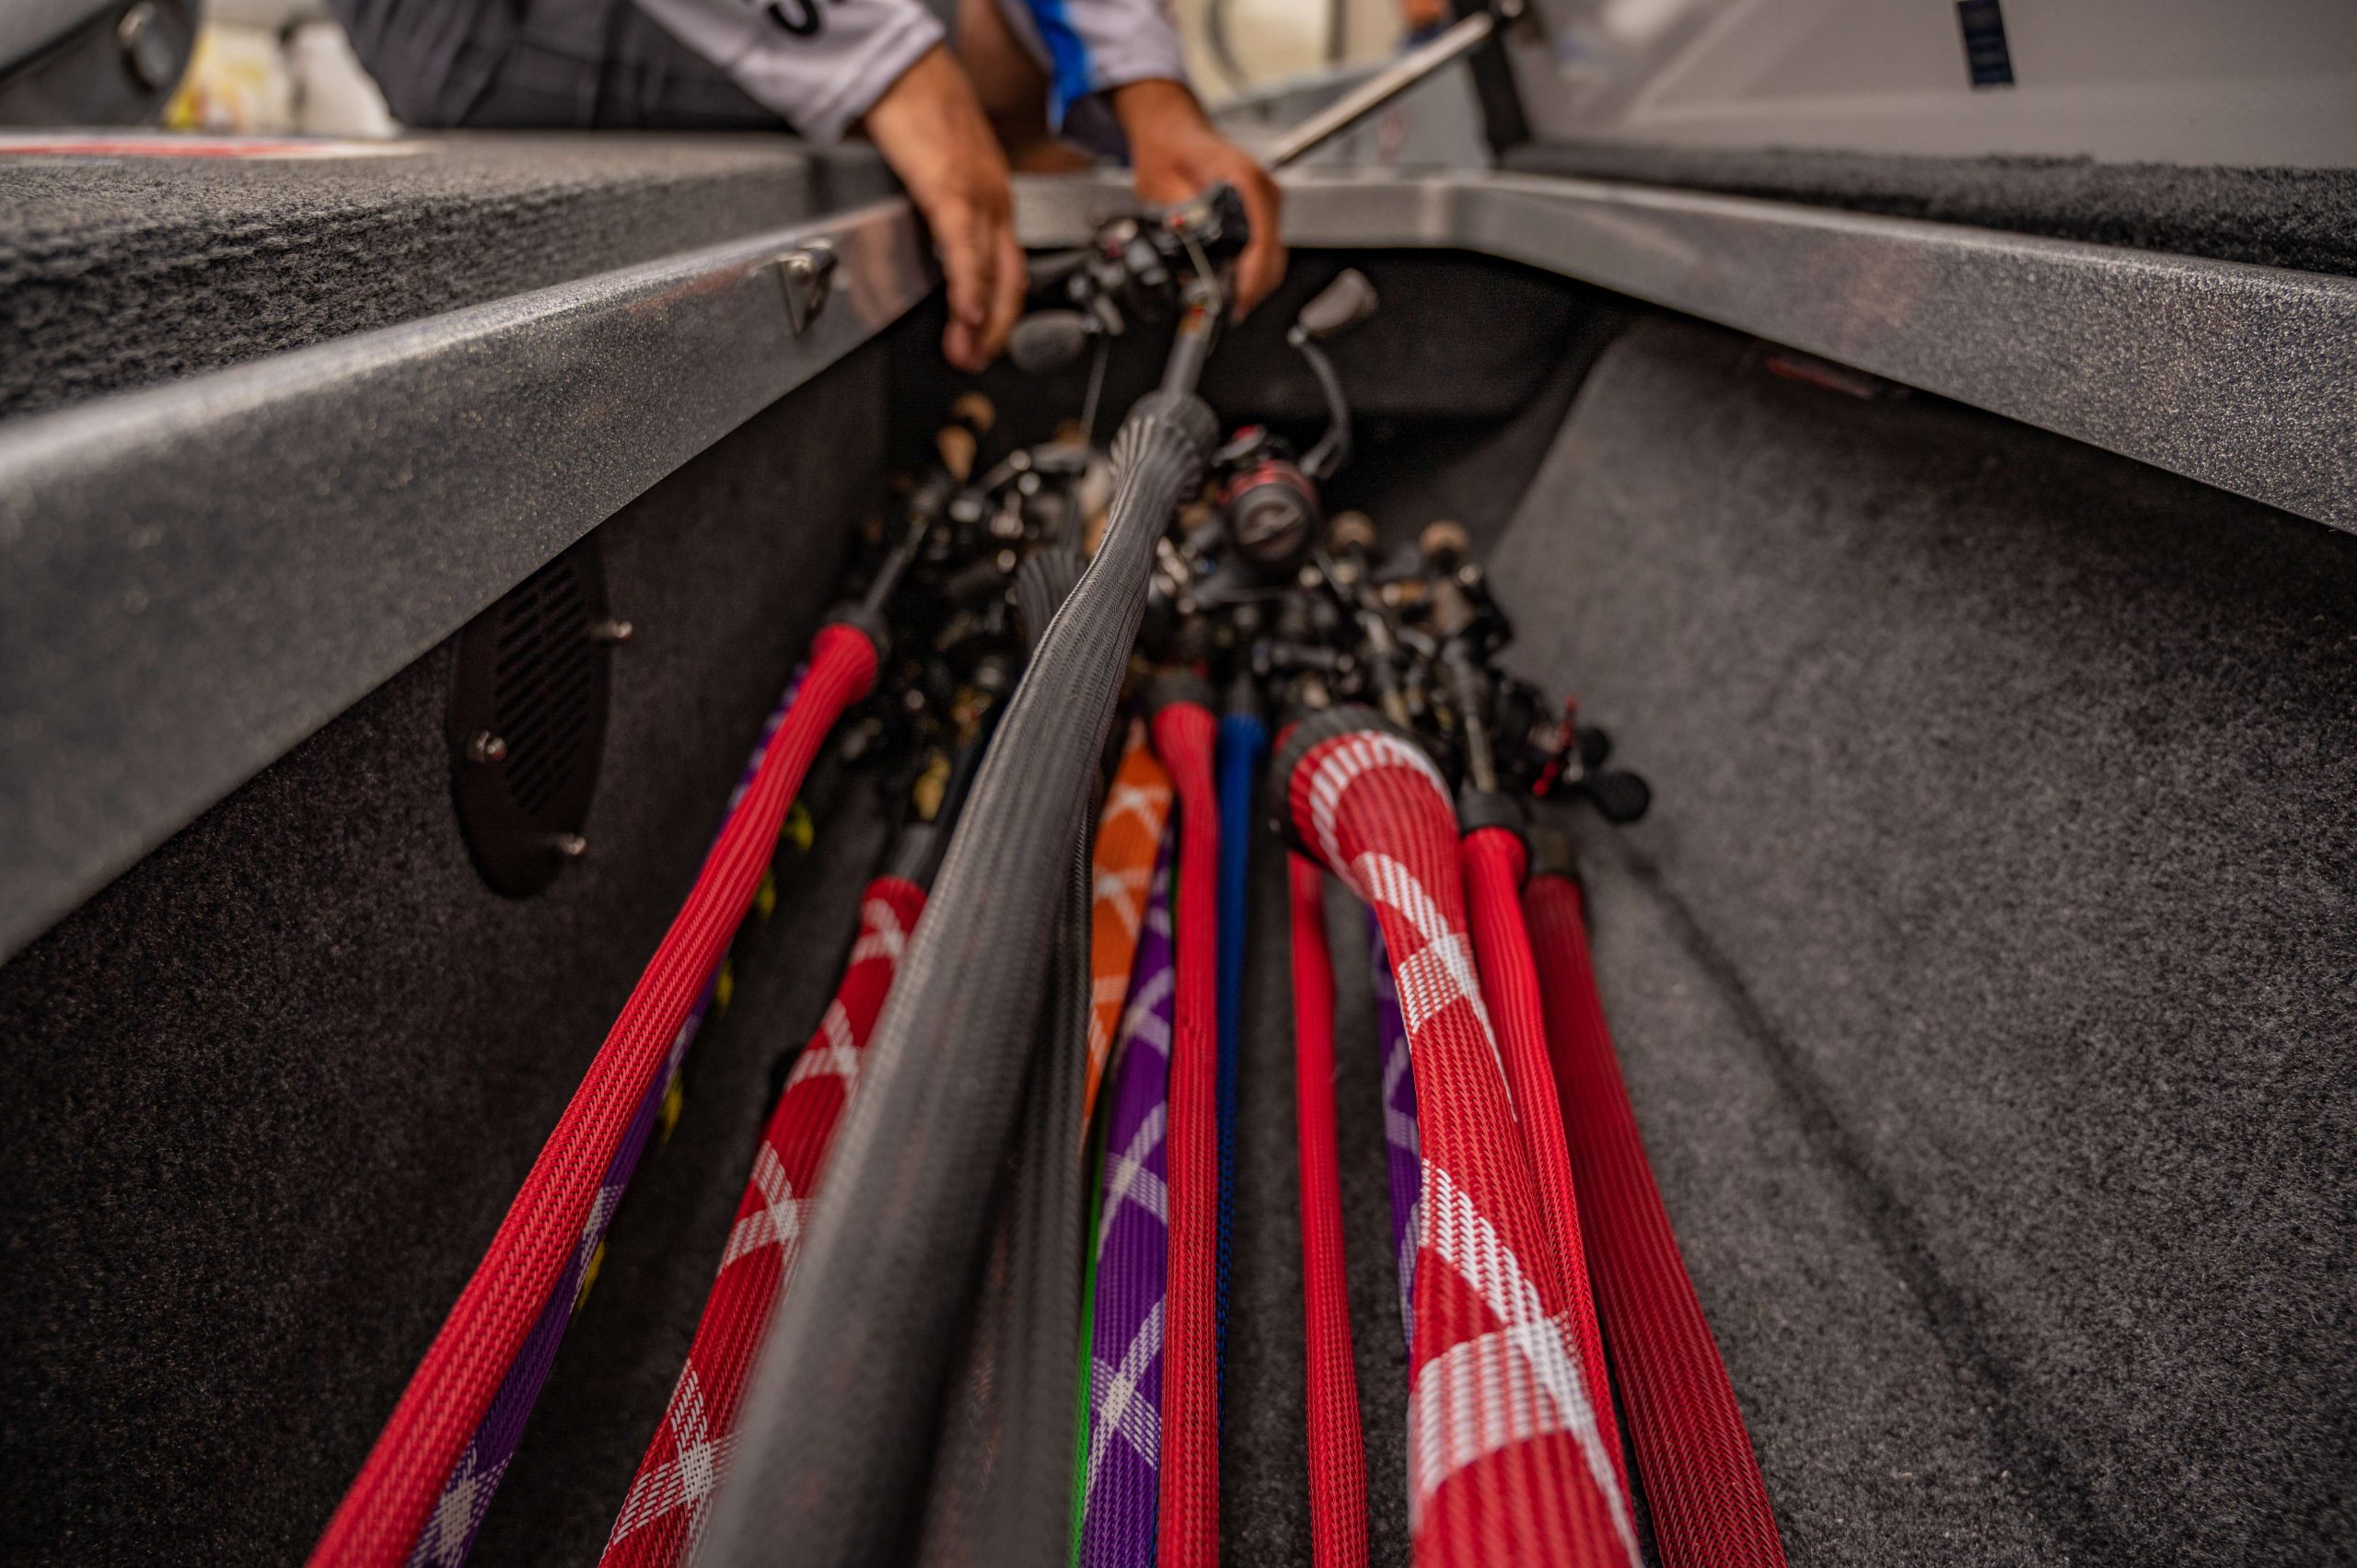 Others were tucked away in the boat for the official practice period. Gleason carefully grabs a few from the front locker of his Phoenix boat.